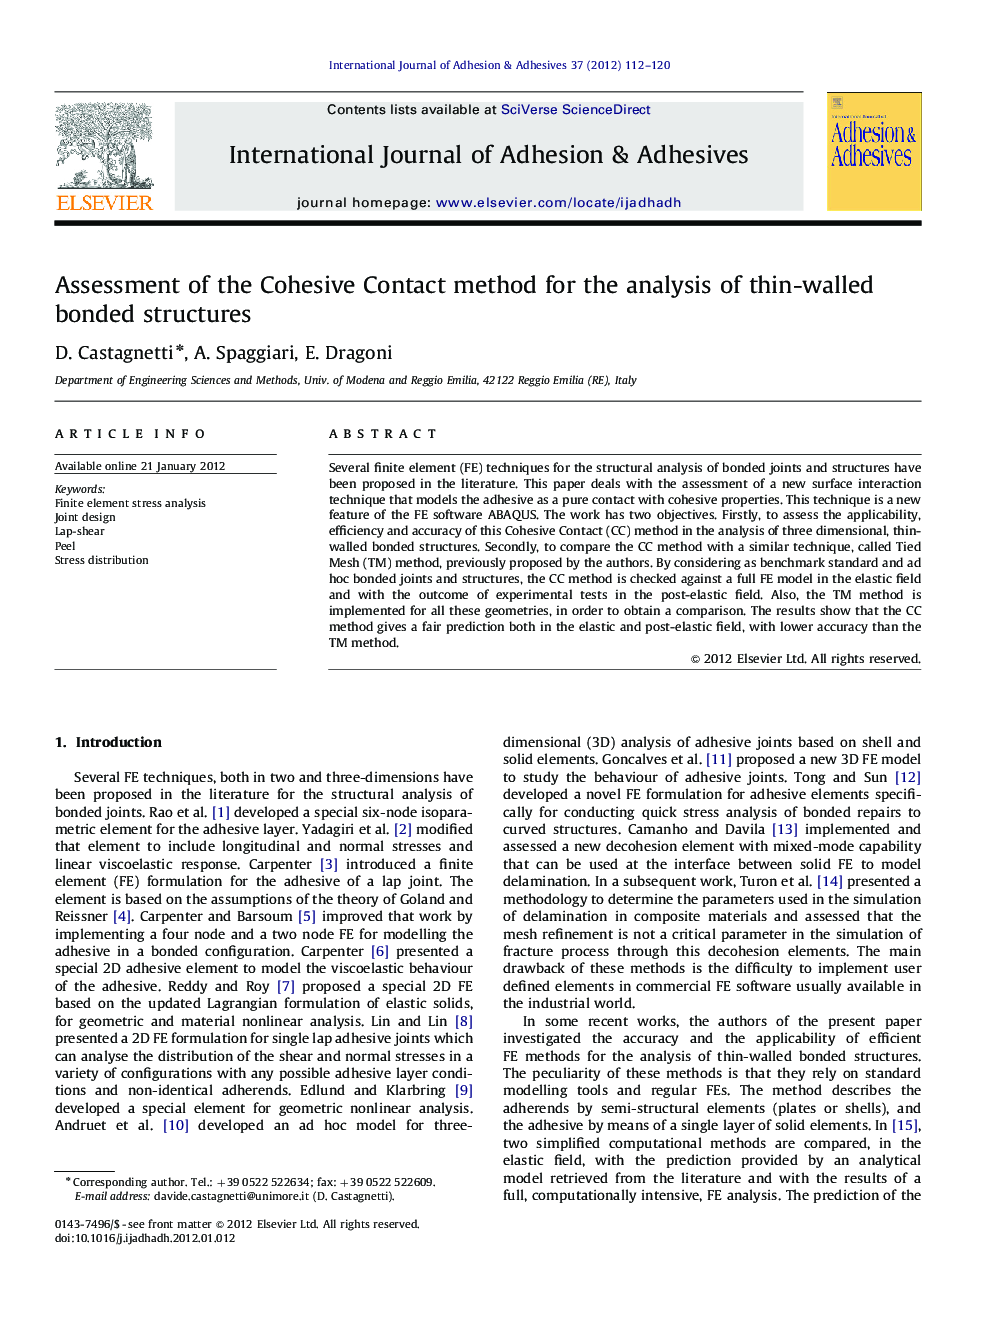 Assessment of the Cohesive Contact method for the analysis of thin-walled bonded structures